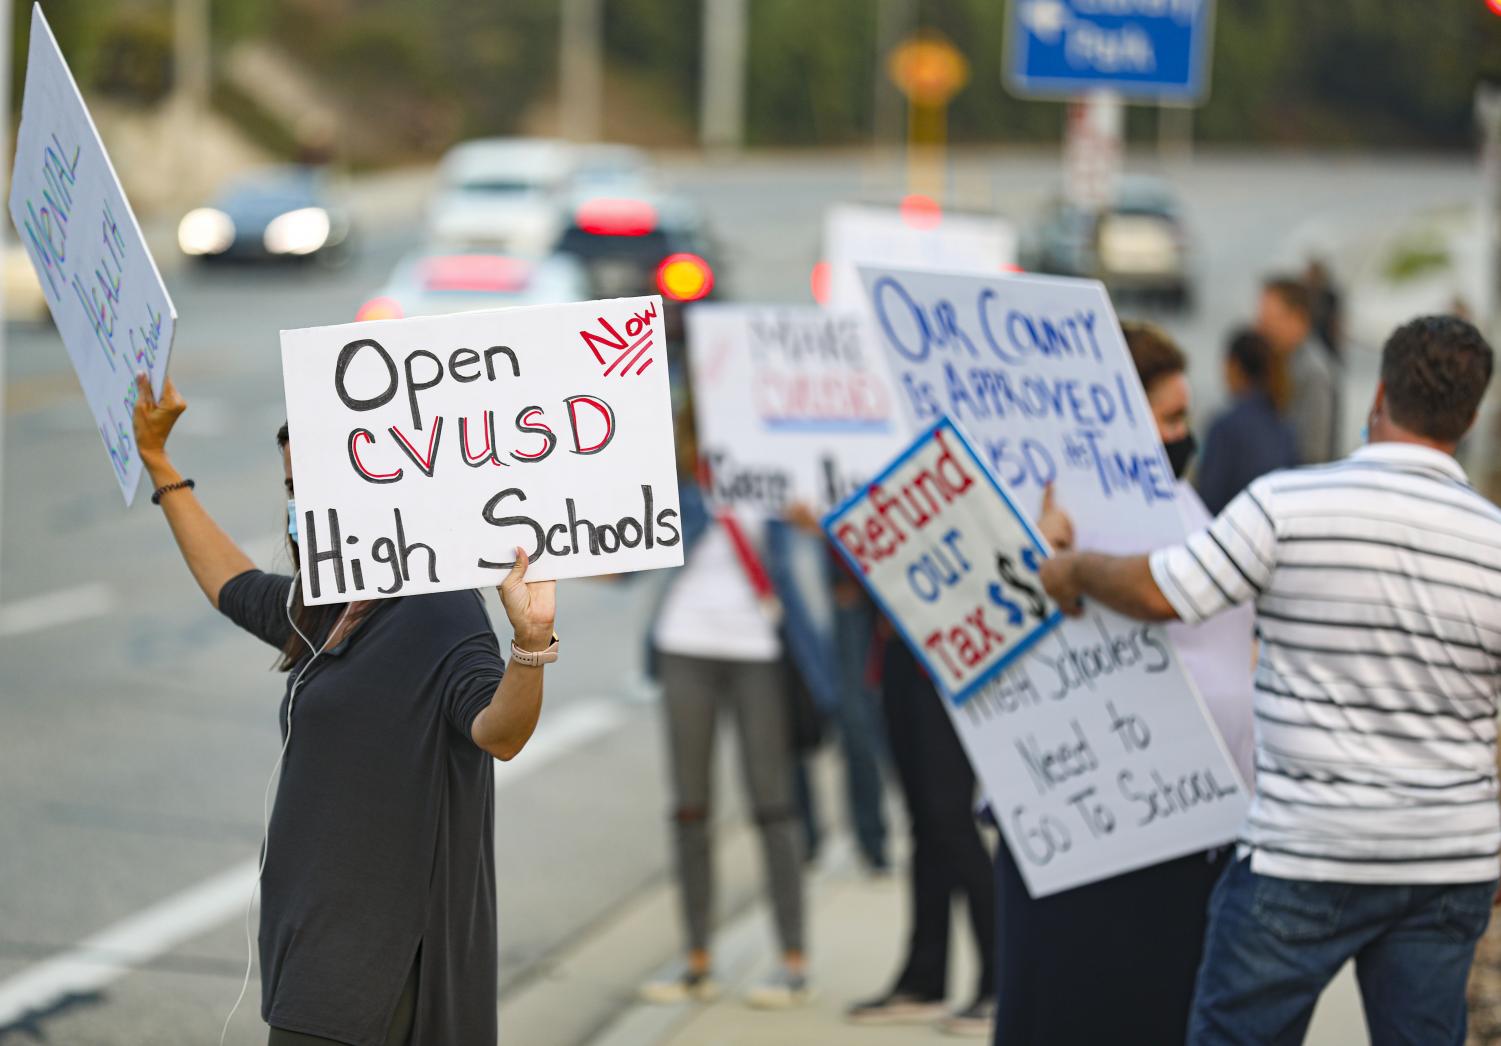 Protester hold up signs in front of the CVUSD district office during the